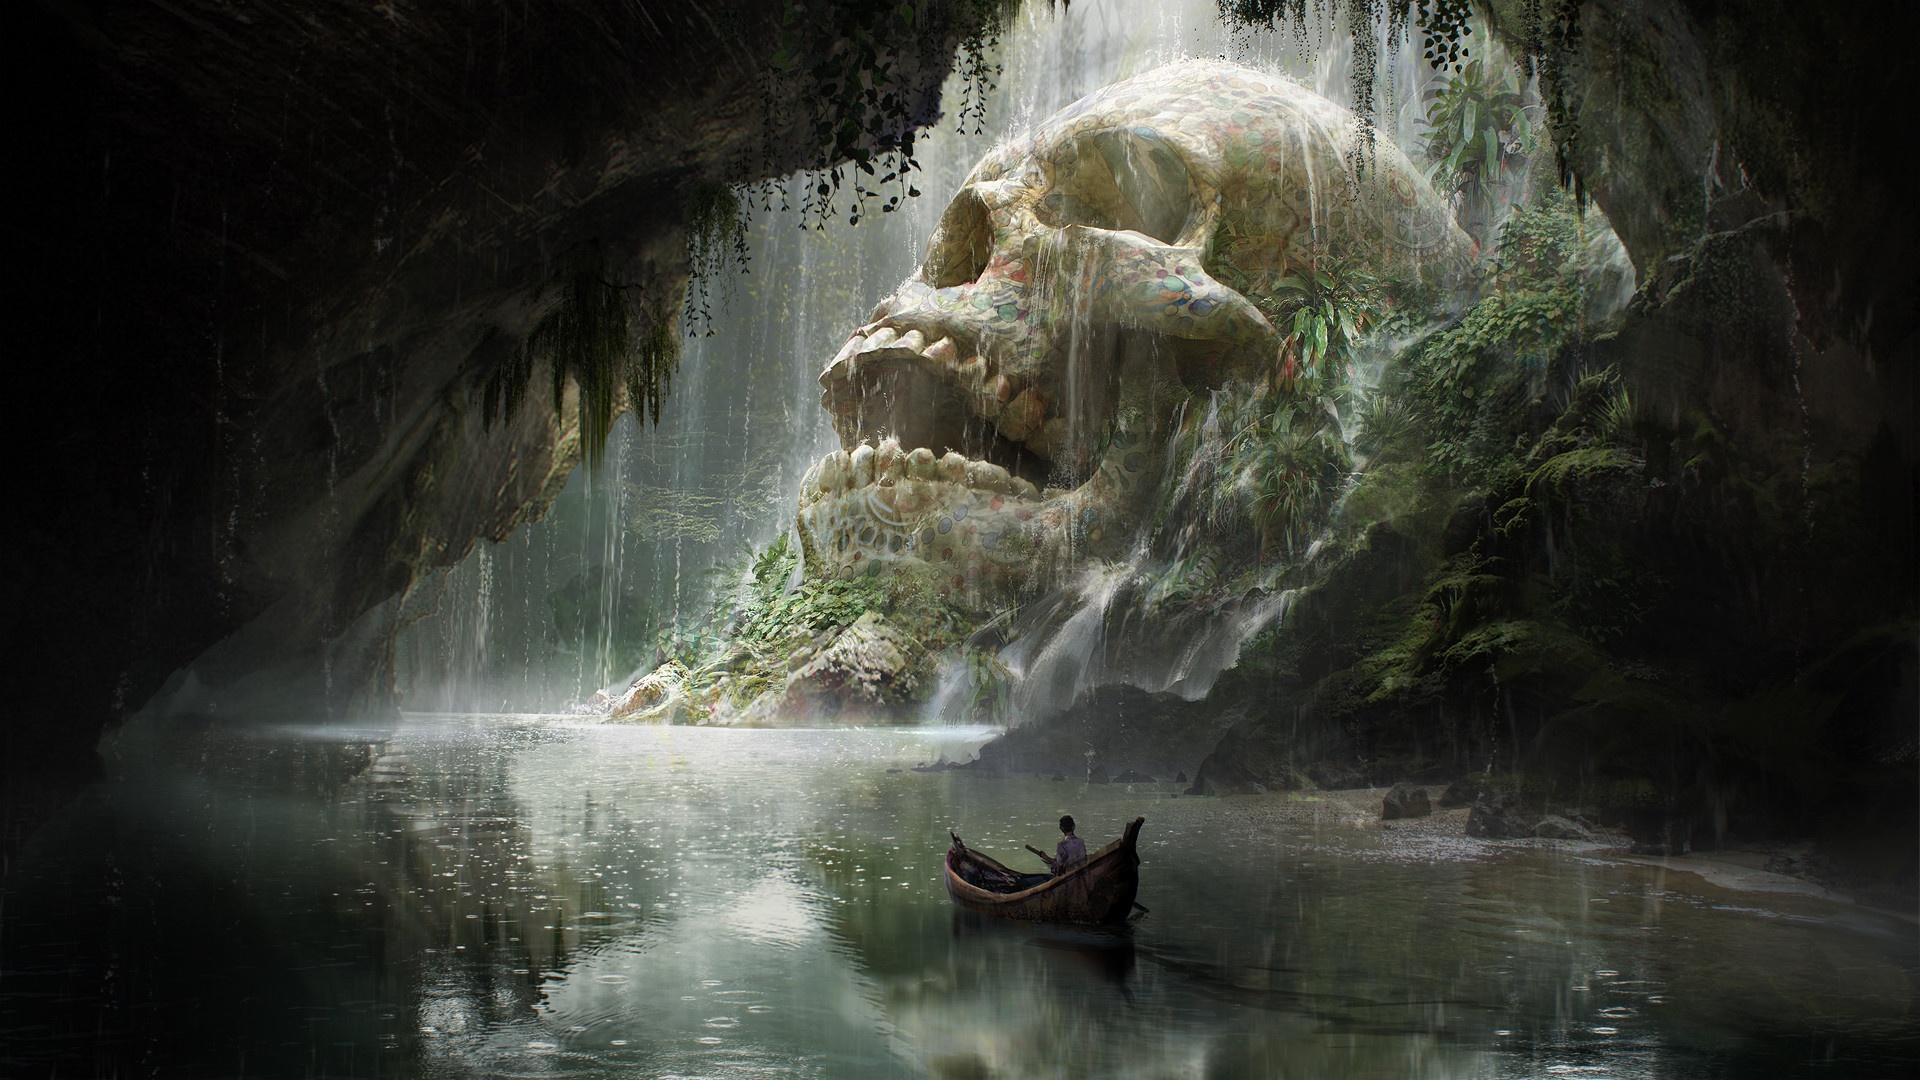 Rowing to Skull Island by Quentin Mabille